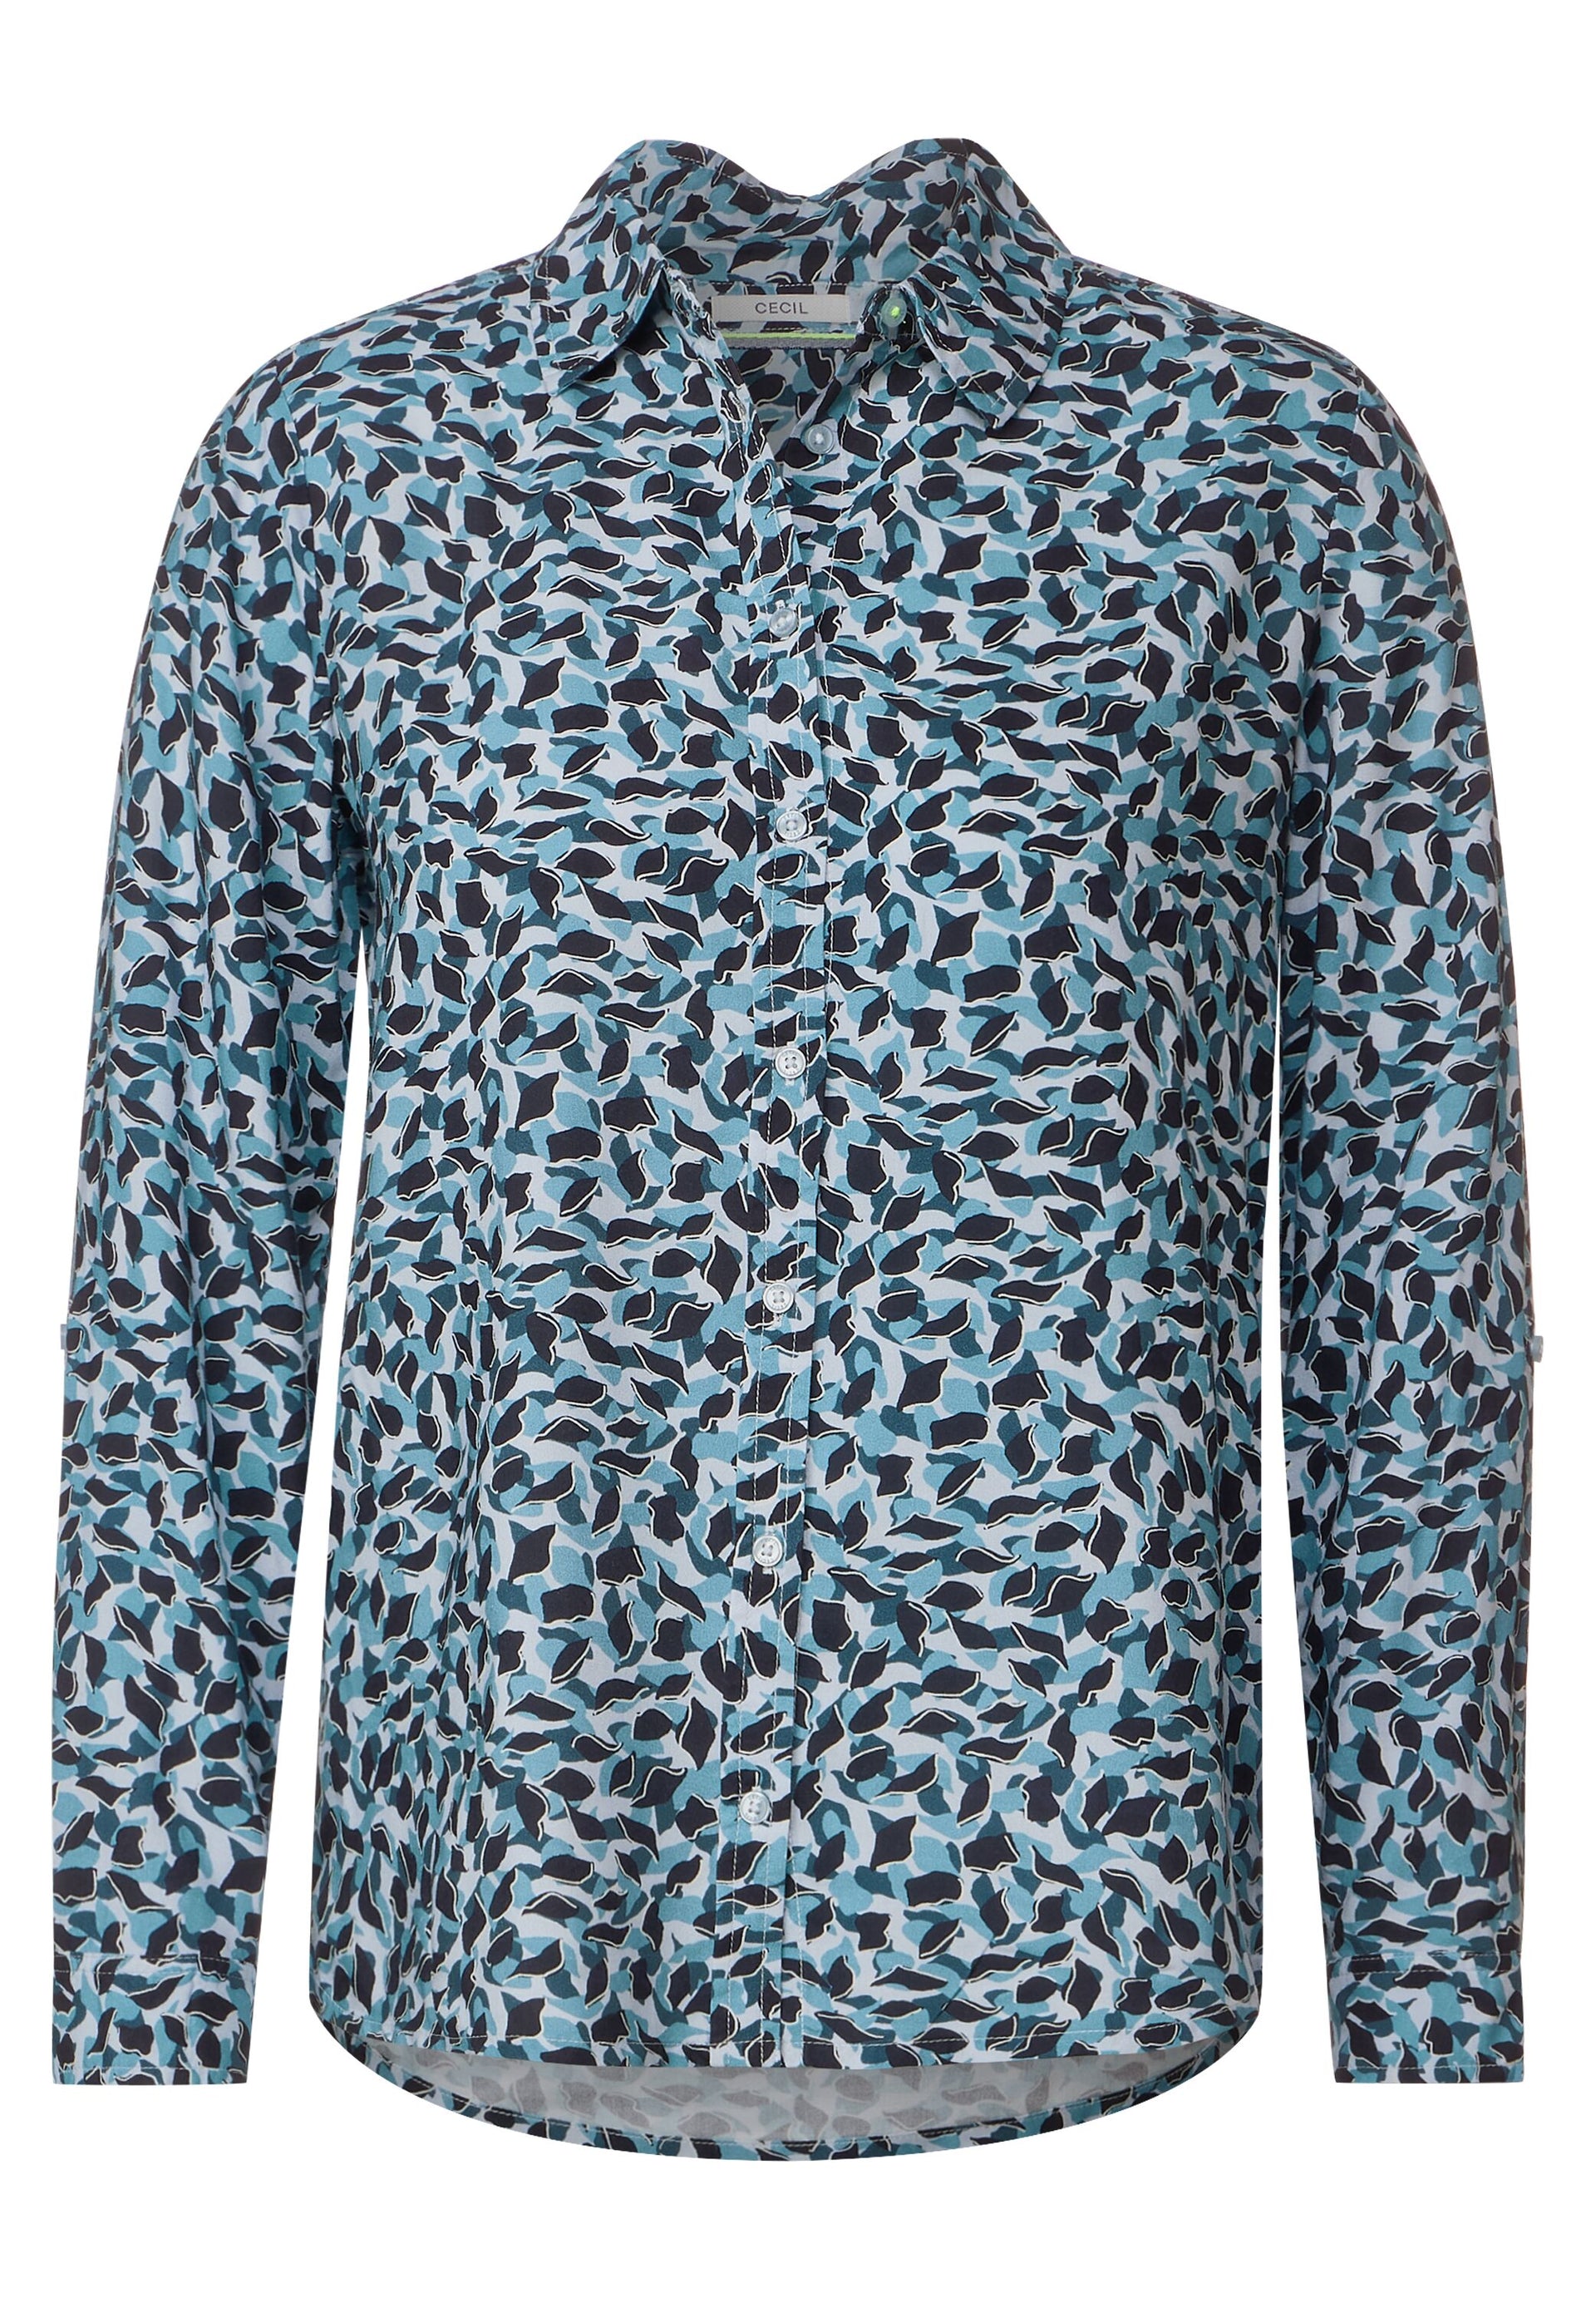 CECIL - Bluse mit grafischem Print blue – - Mode petrol TWISTY strong Farbe